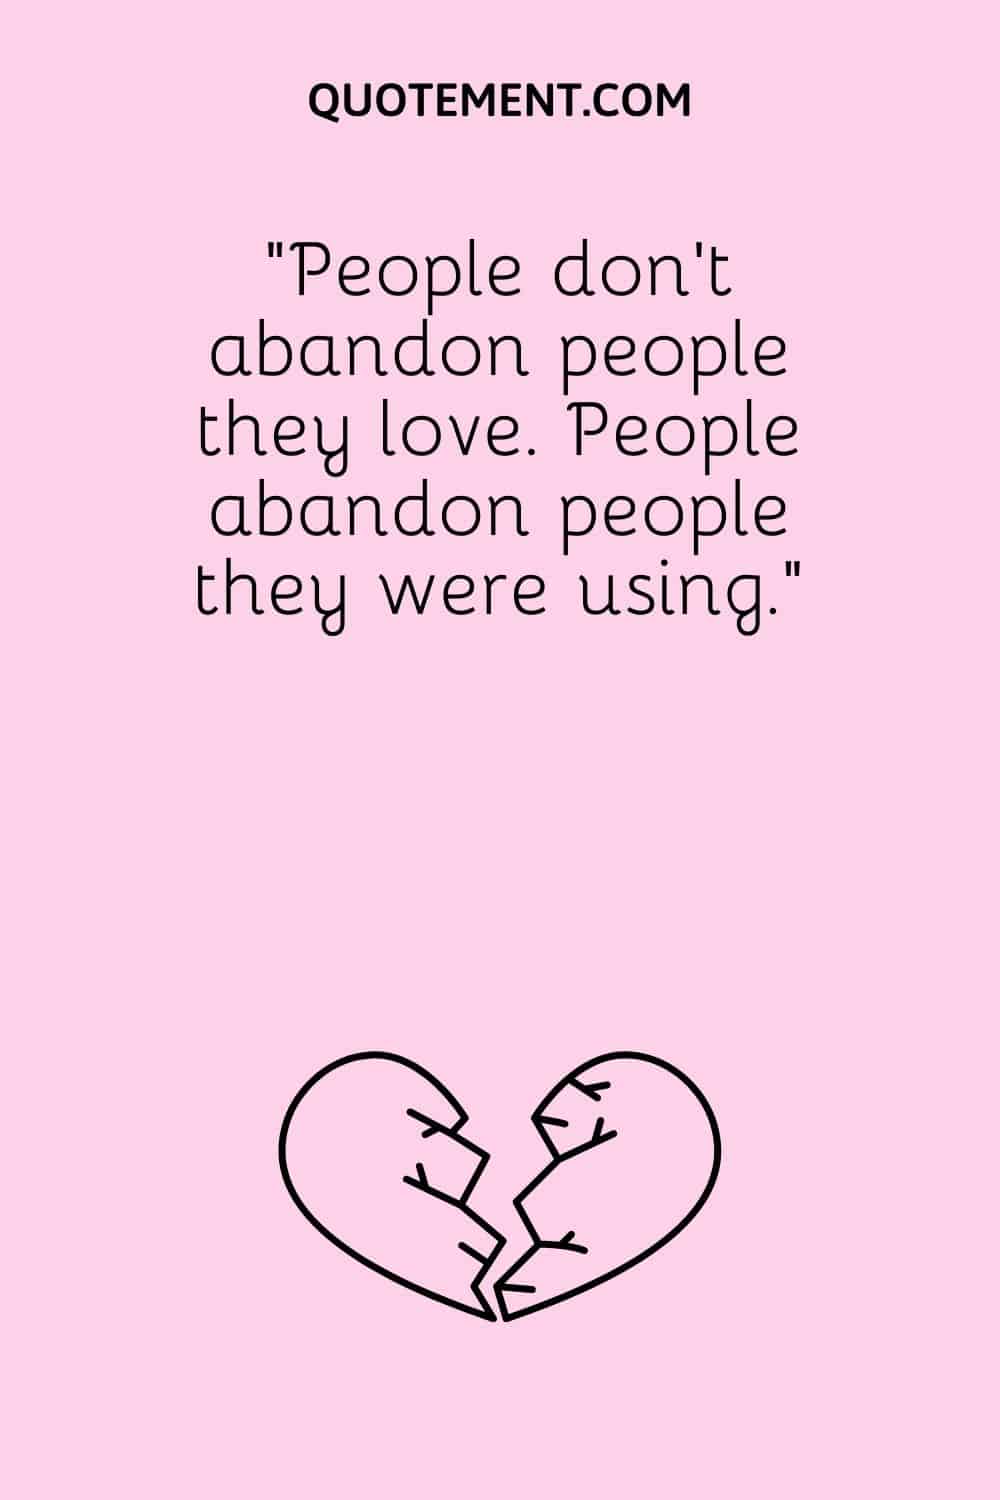 “People don't abandon people they love. People abandon people they were using.”